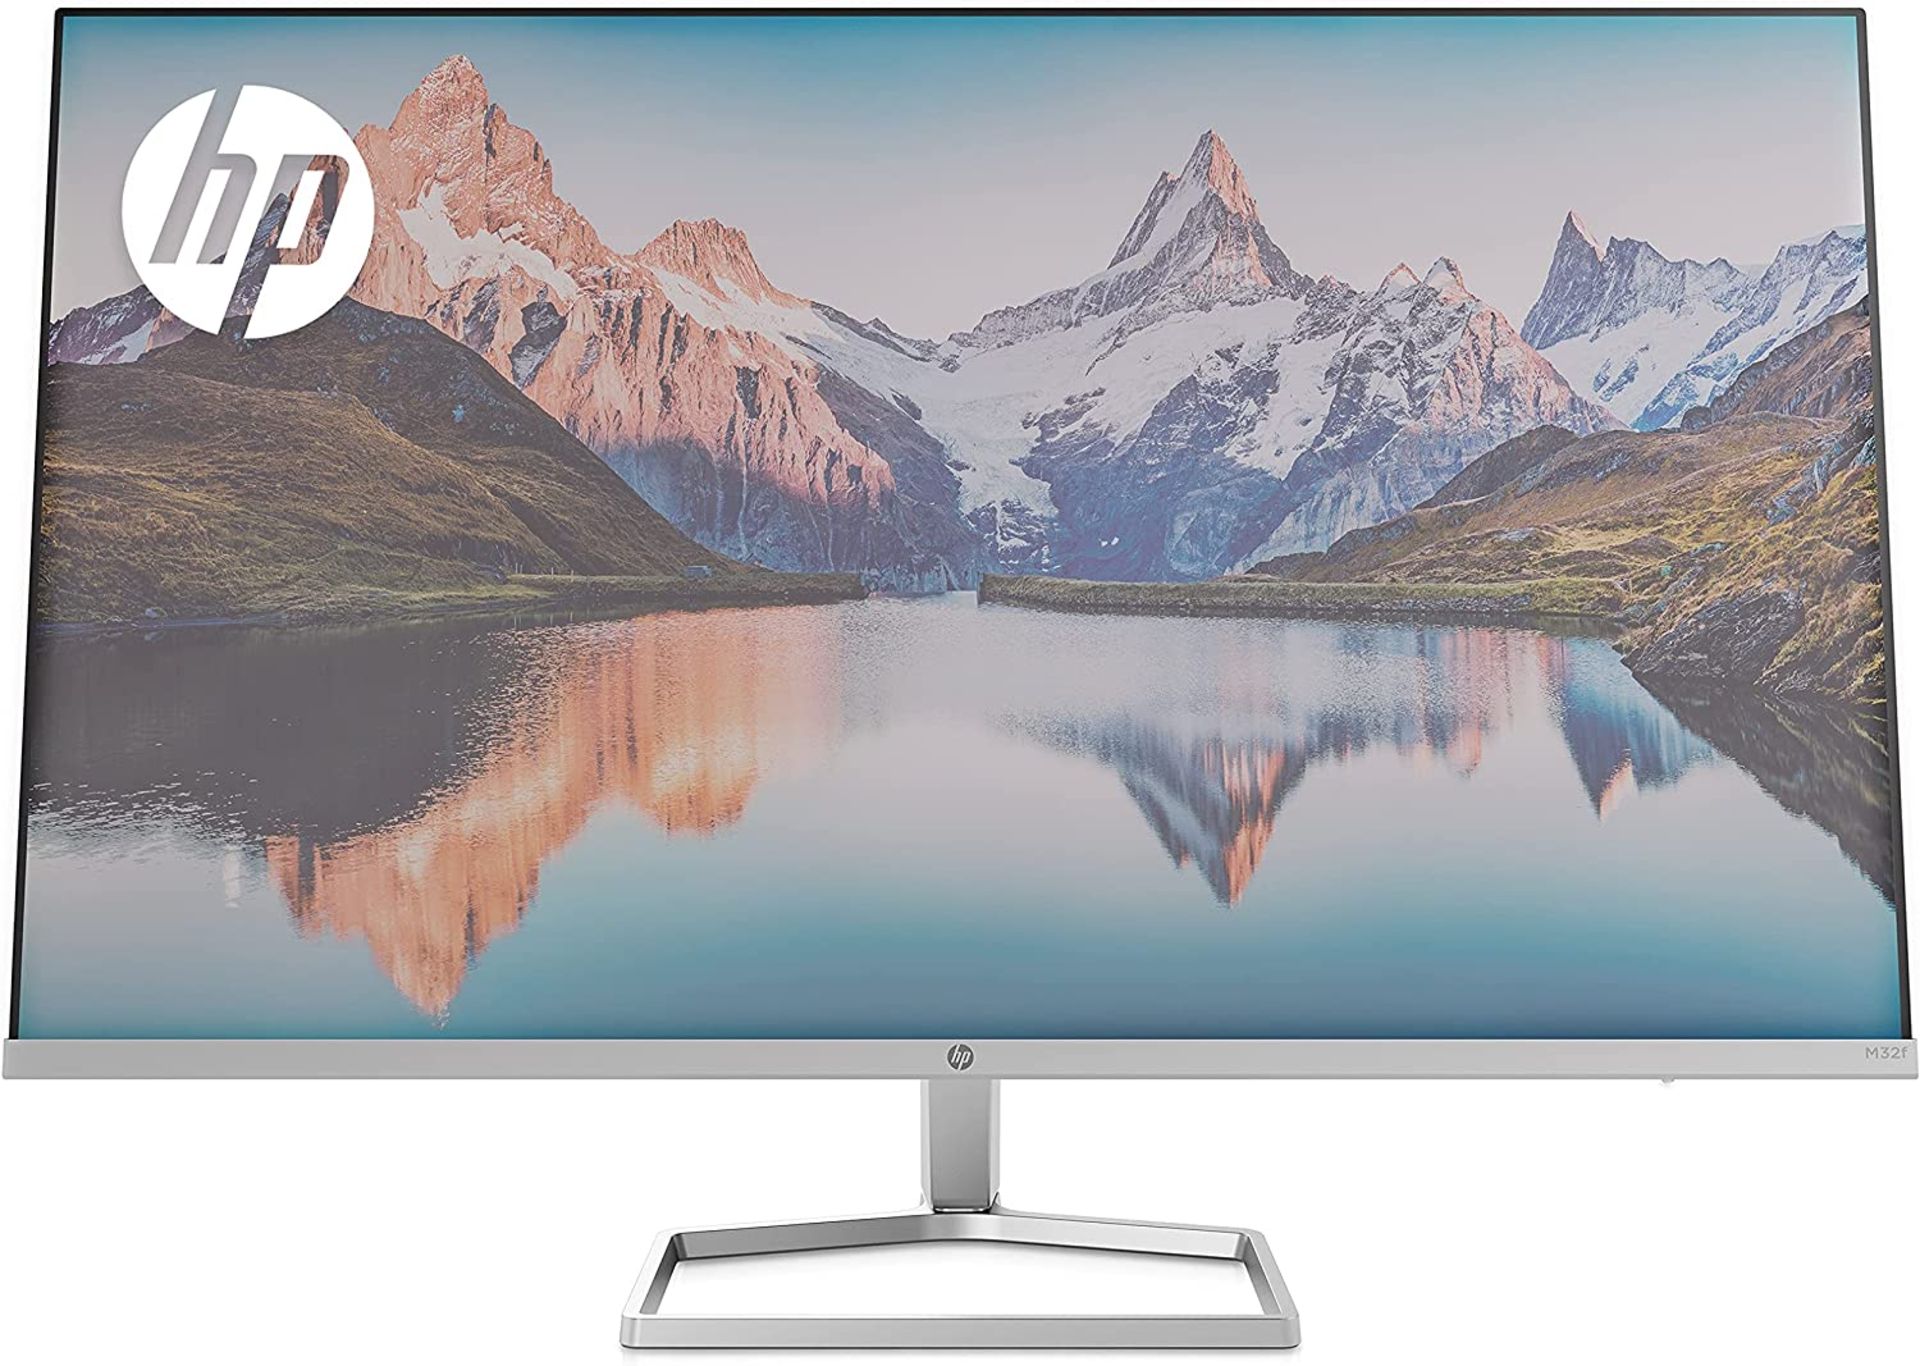 1 x HP 31.5 Inch IPS Ultra Sim Huge Computer Monitor - Includes Original Box and Accessories - - Image 4 of 9